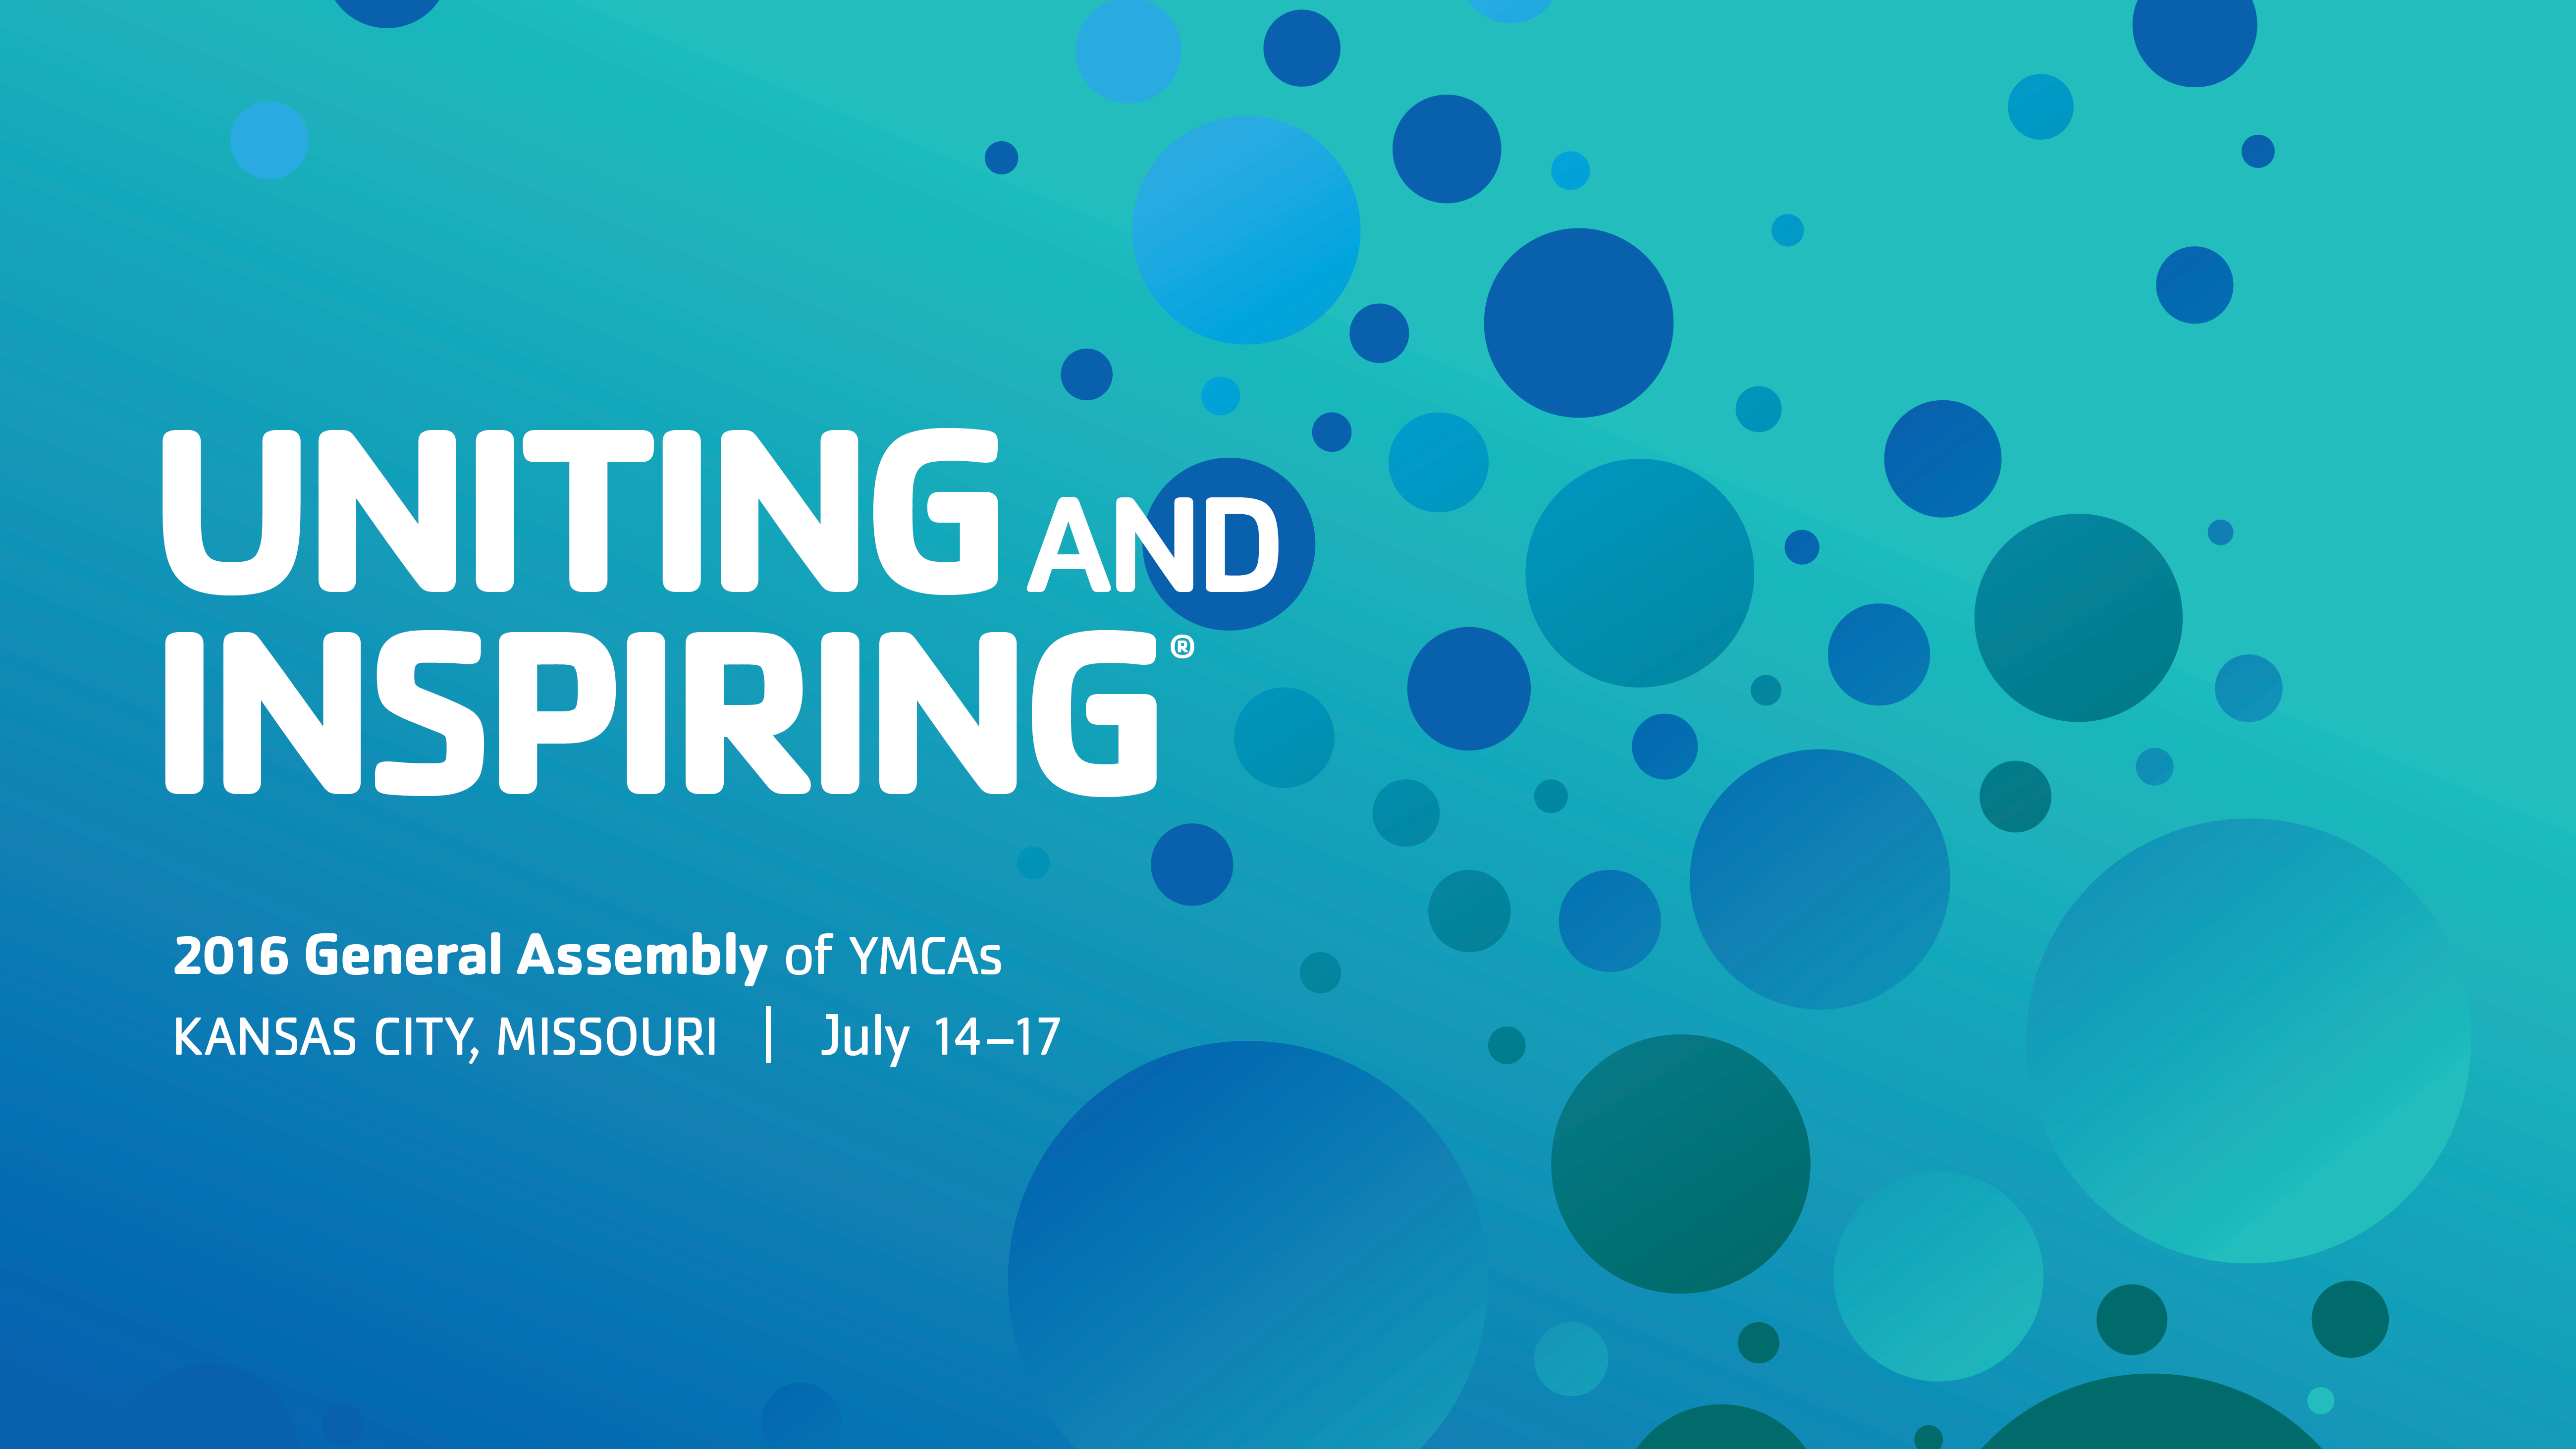 YMCA of the USA - 2016 General Assembly